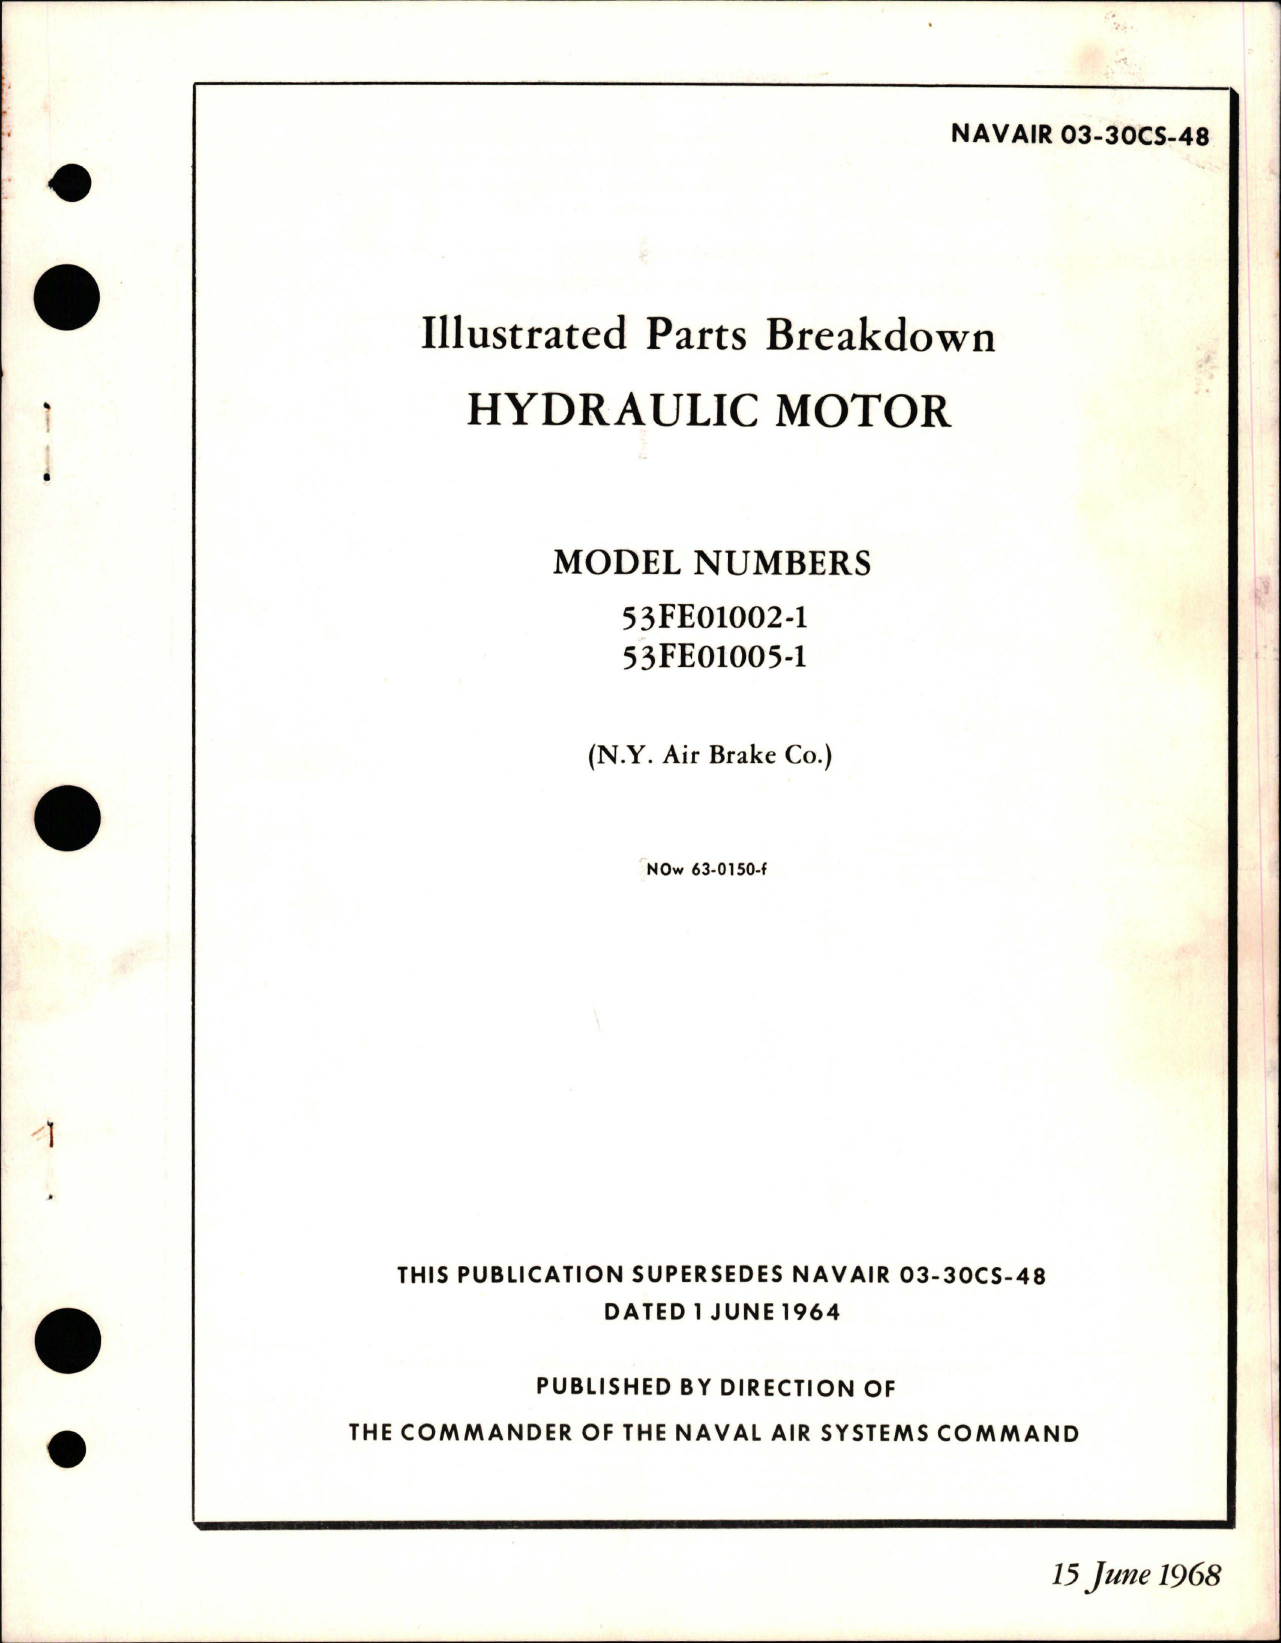 Sample page 1 from AirCorps Library document: Illustrated Parts Breakdown for Hydraulic Motor - Models 53FE01002-1 and 53FE01005-1